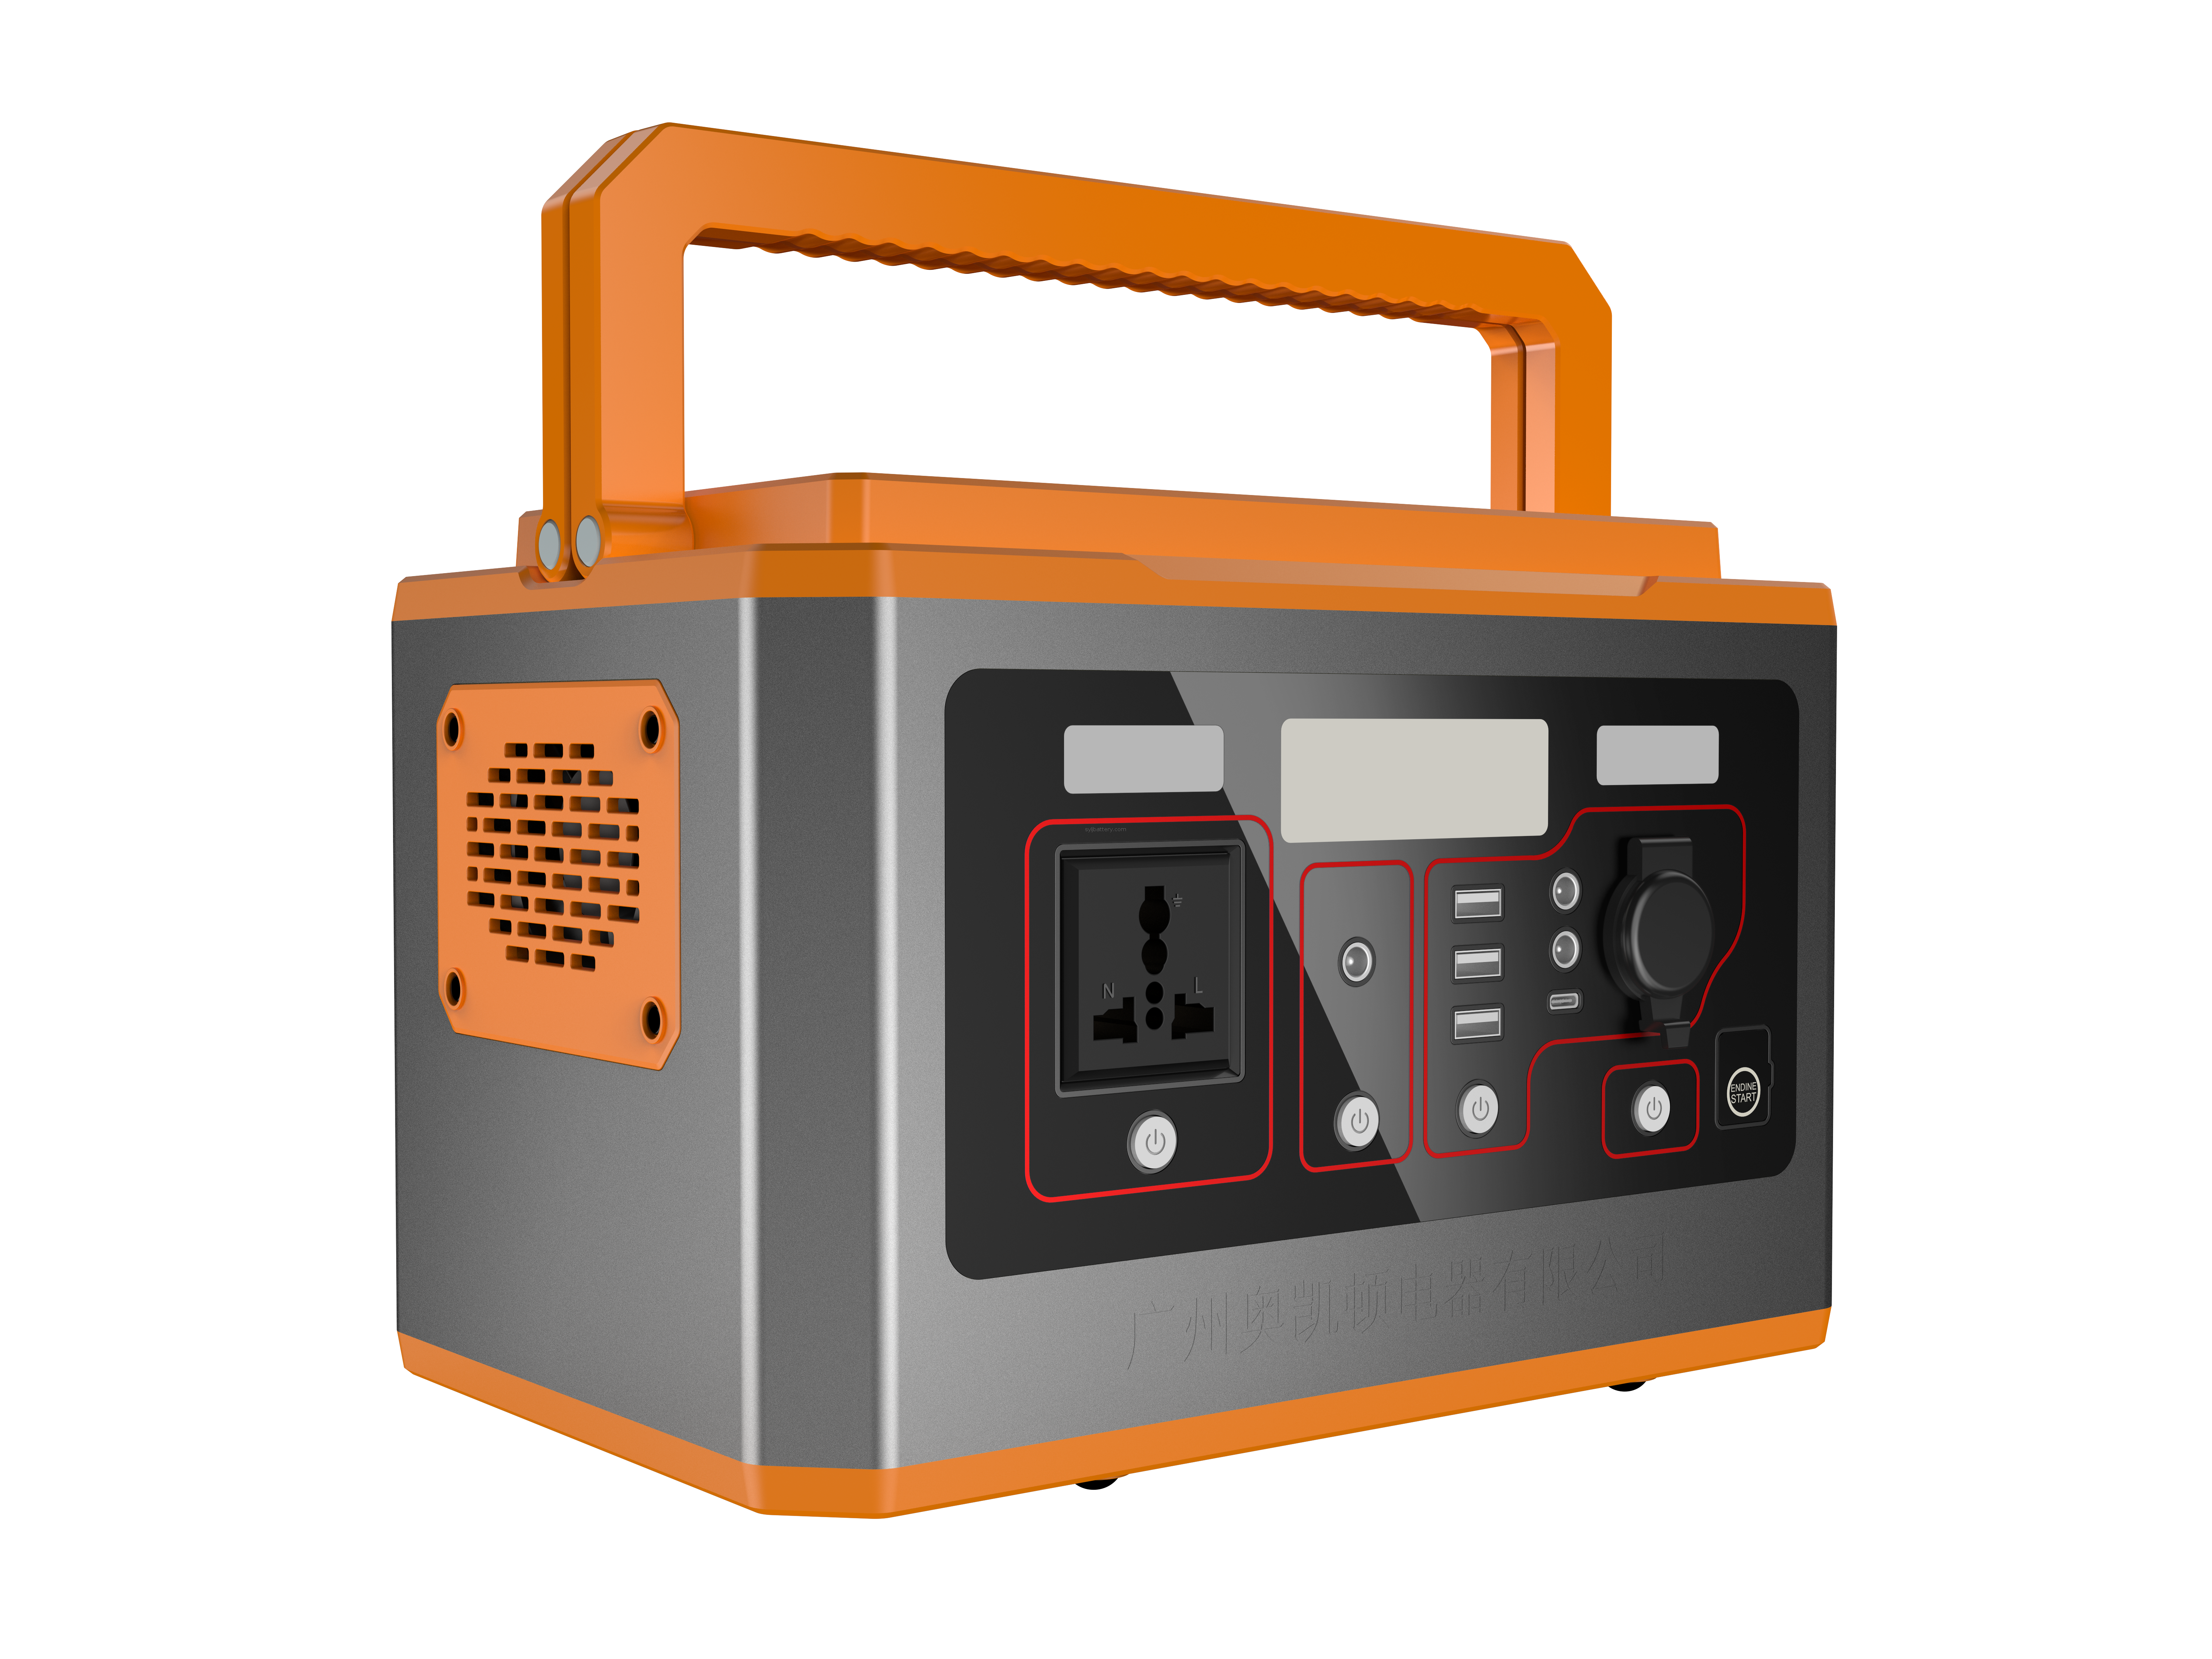  500W Portable Power Station for Emergency Home Backup